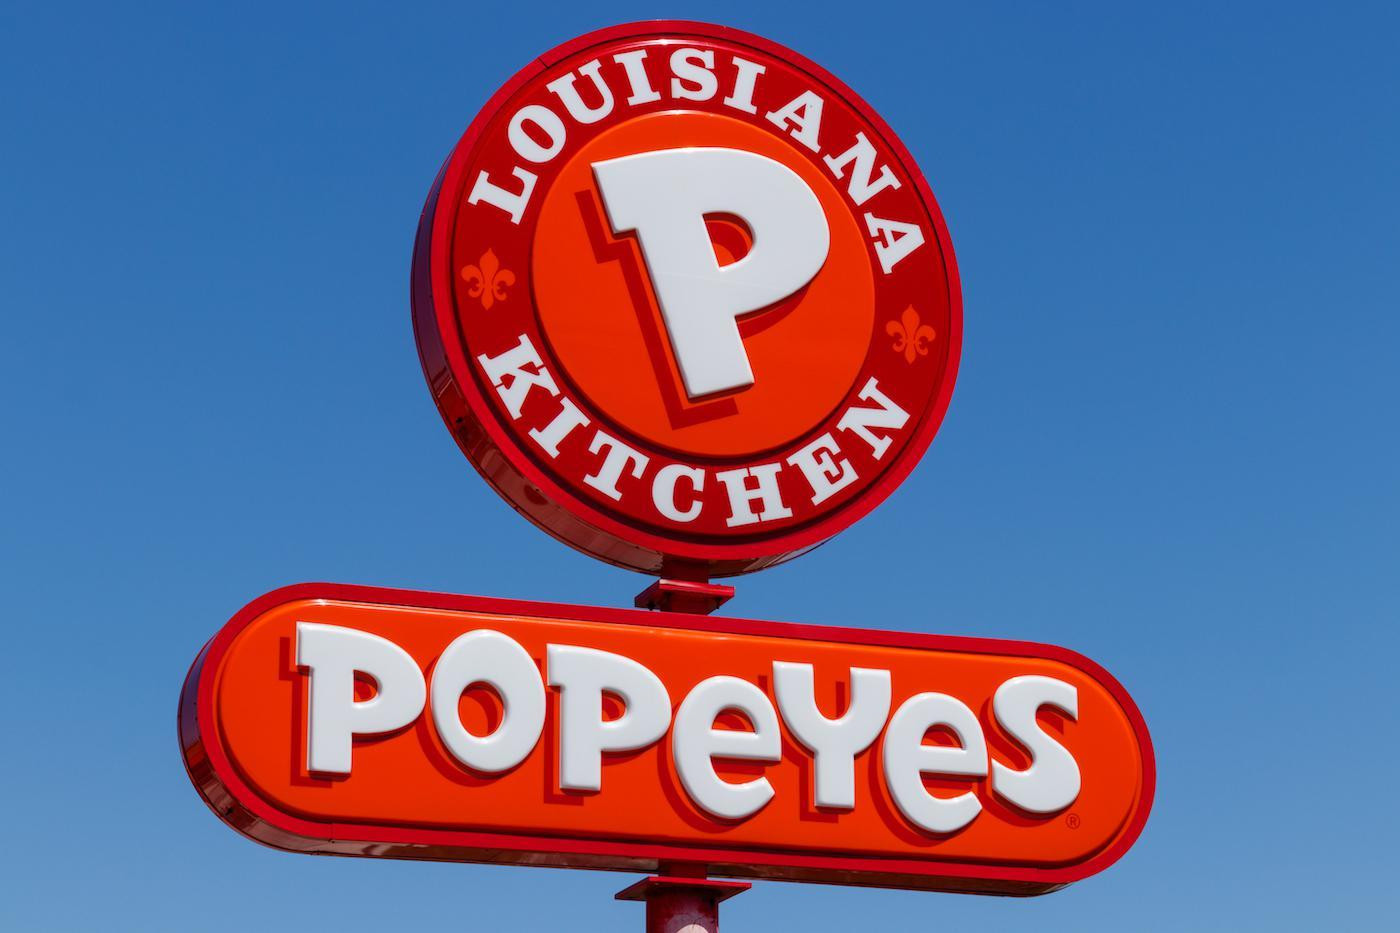 Popeyes Turkey Thanksgiving
 Now You Can Pre Order Popeyes’ Cajun Style Turkeys for